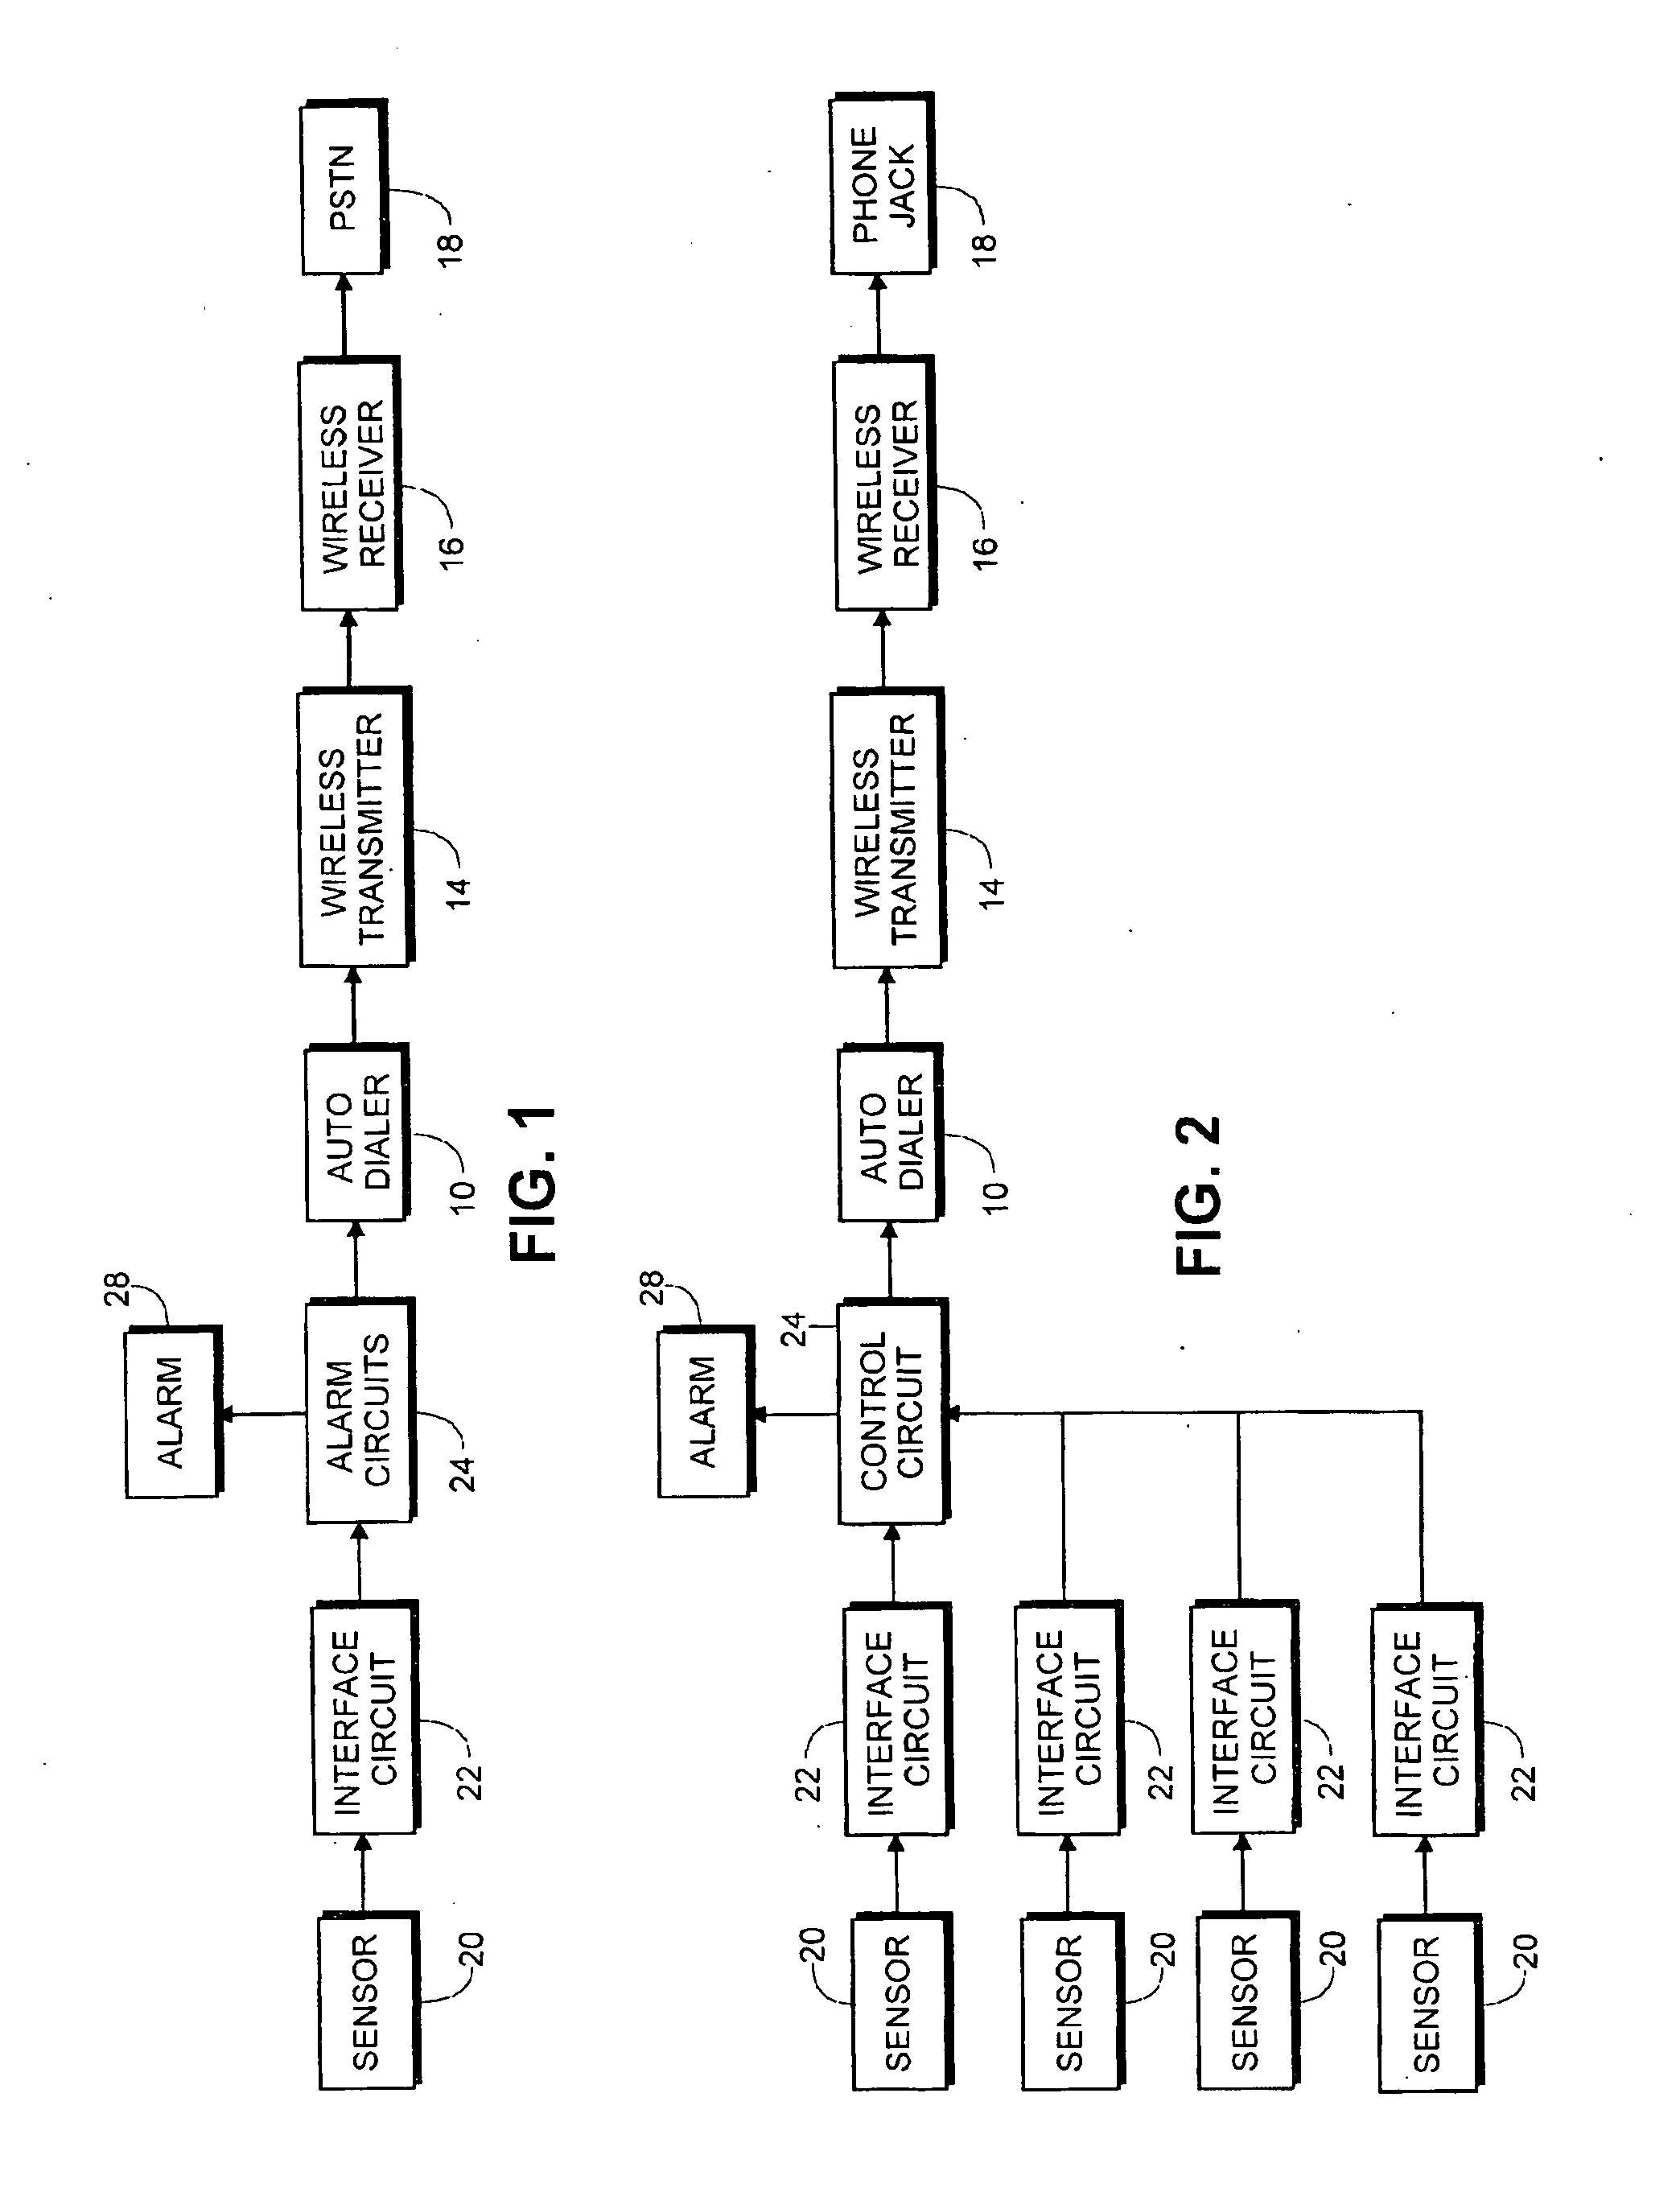 System for requesting service of a machine